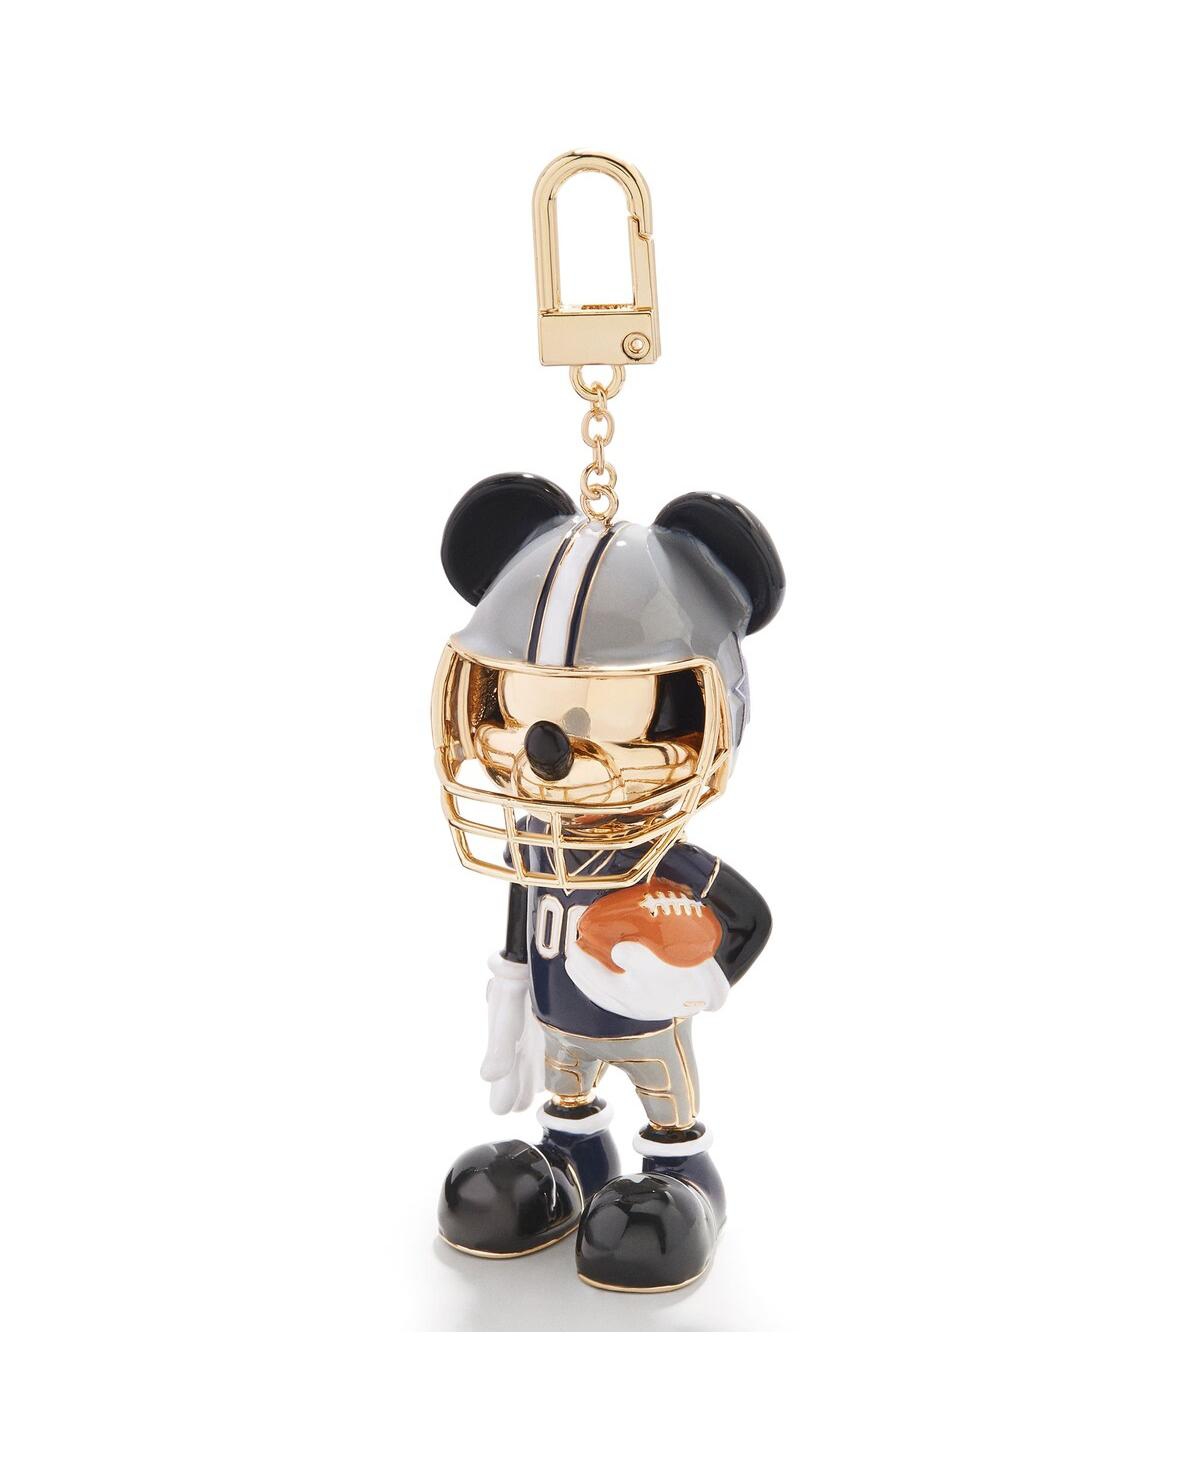 Men's and Women's Baublebar Dallas Cowboys Disney Mickey Mouse Keychain - Gray